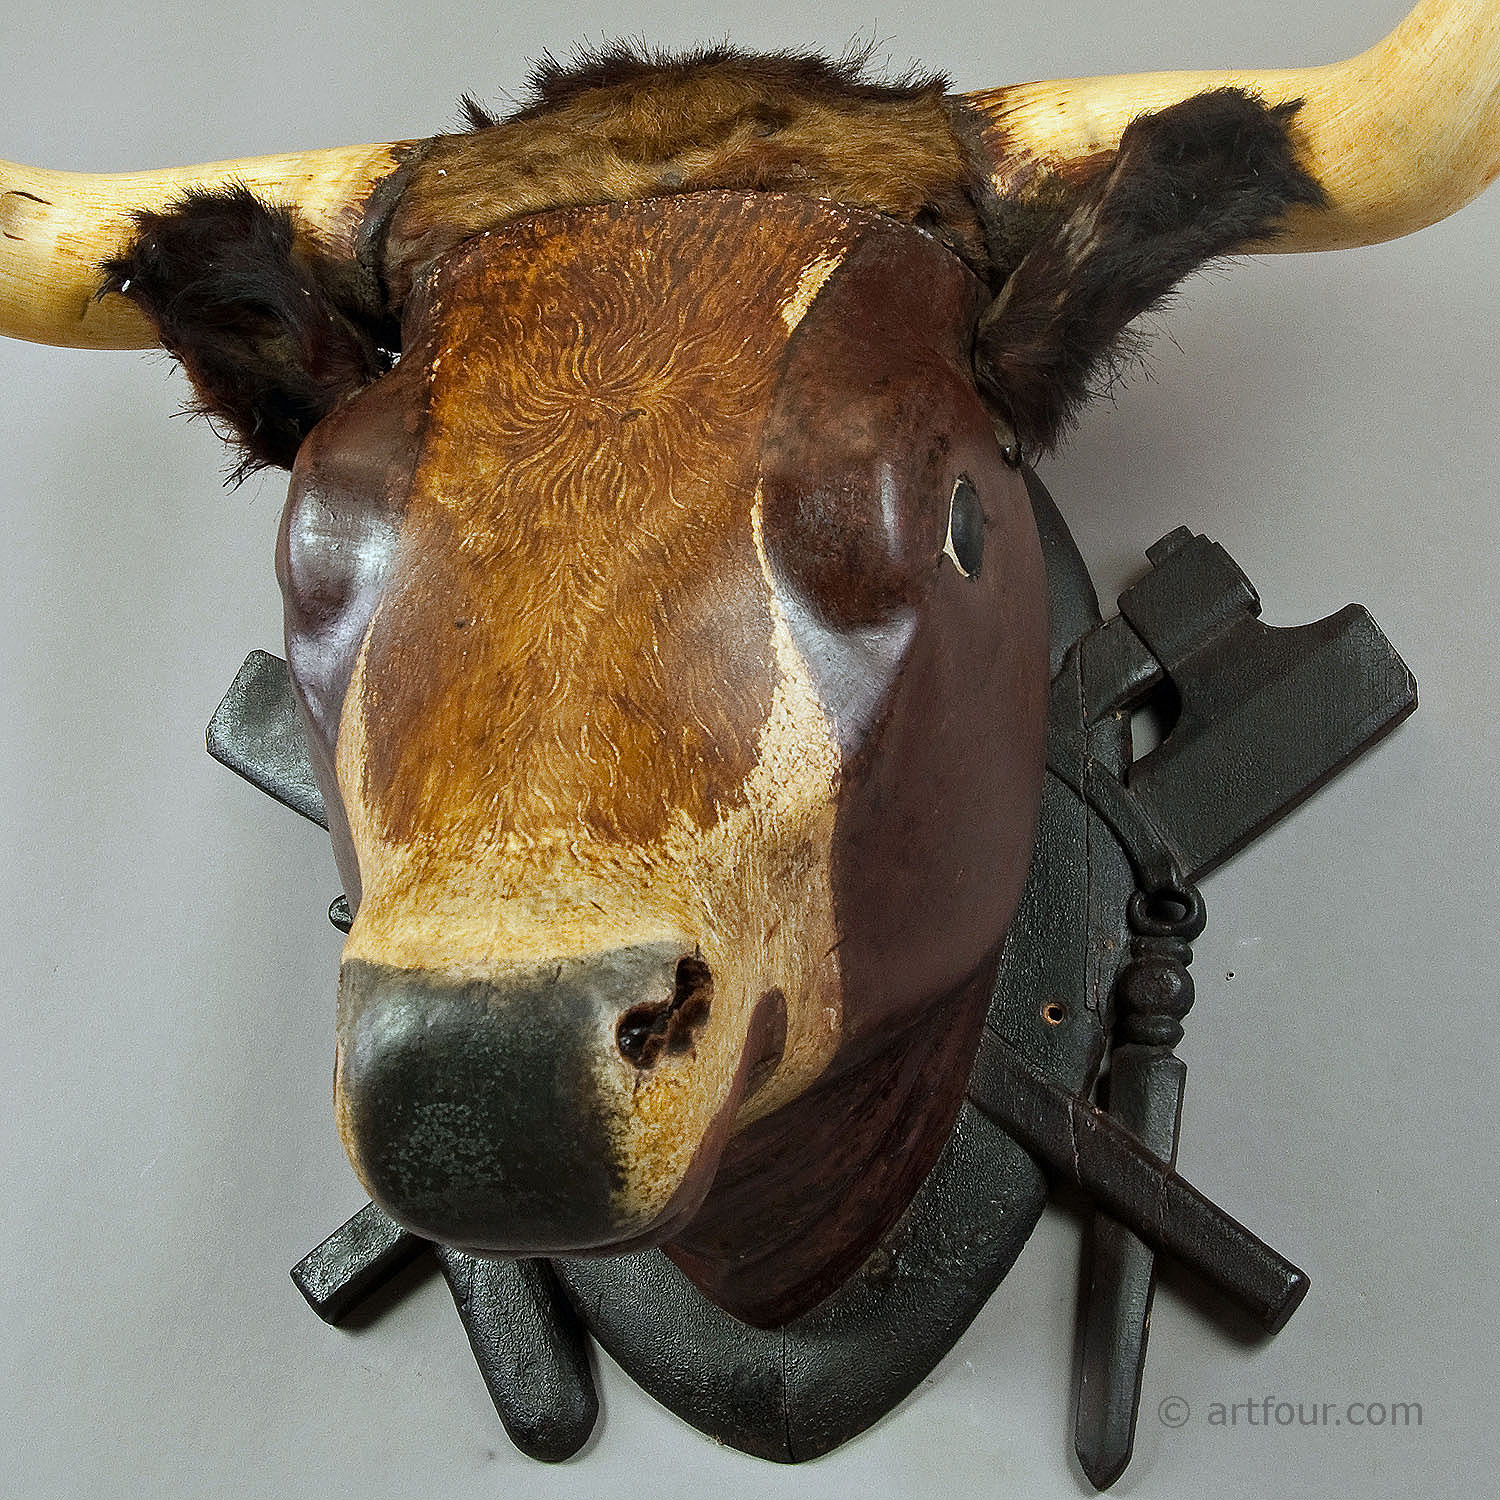 Very large Wooden Carved Bull Head from a Butchery ca. 1880